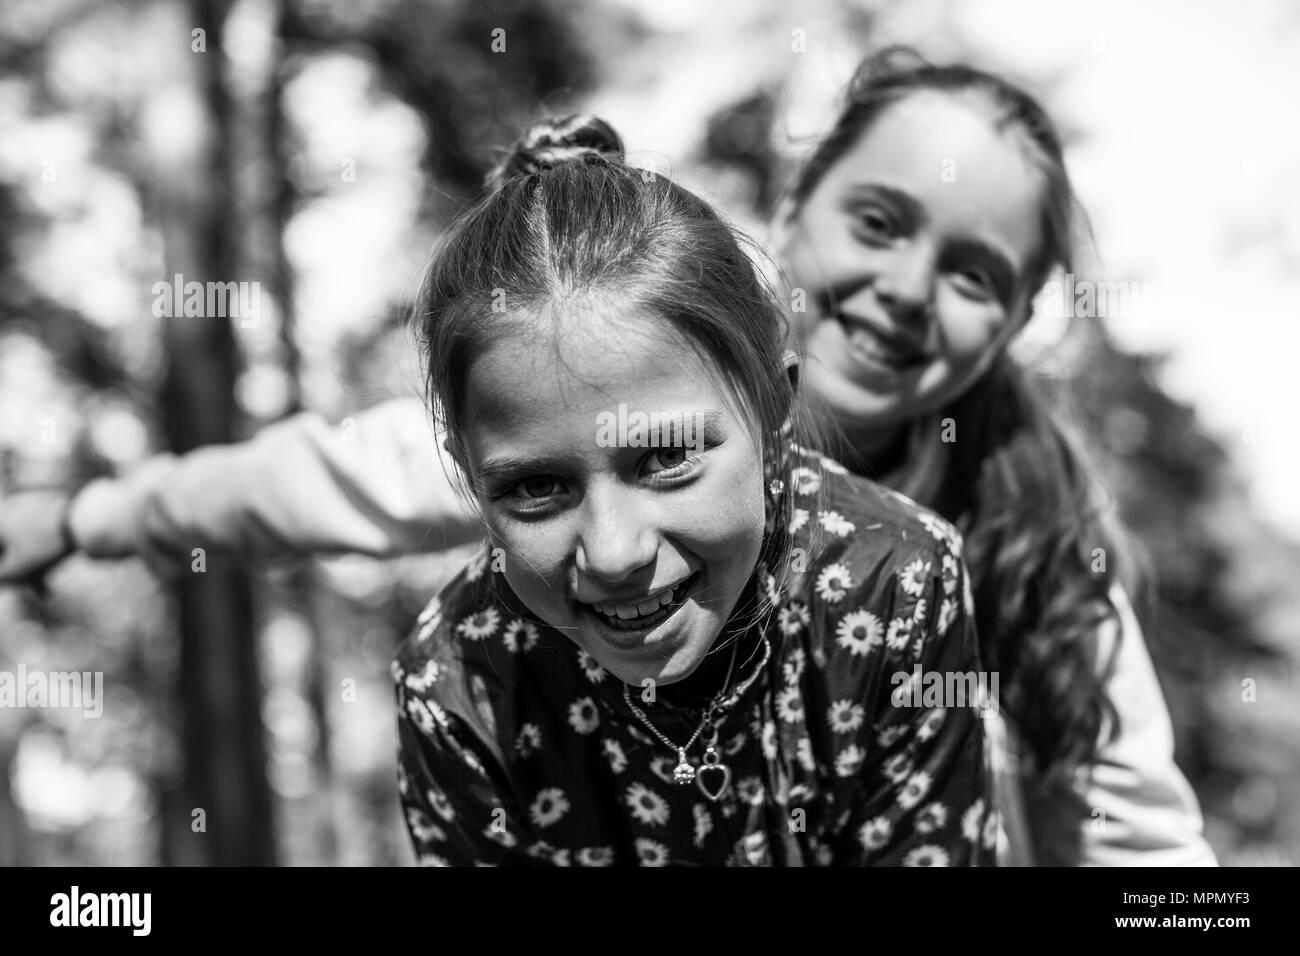 Two girls sisters or girlfriends having fun outdoors. Black and white photo. Stock Photo